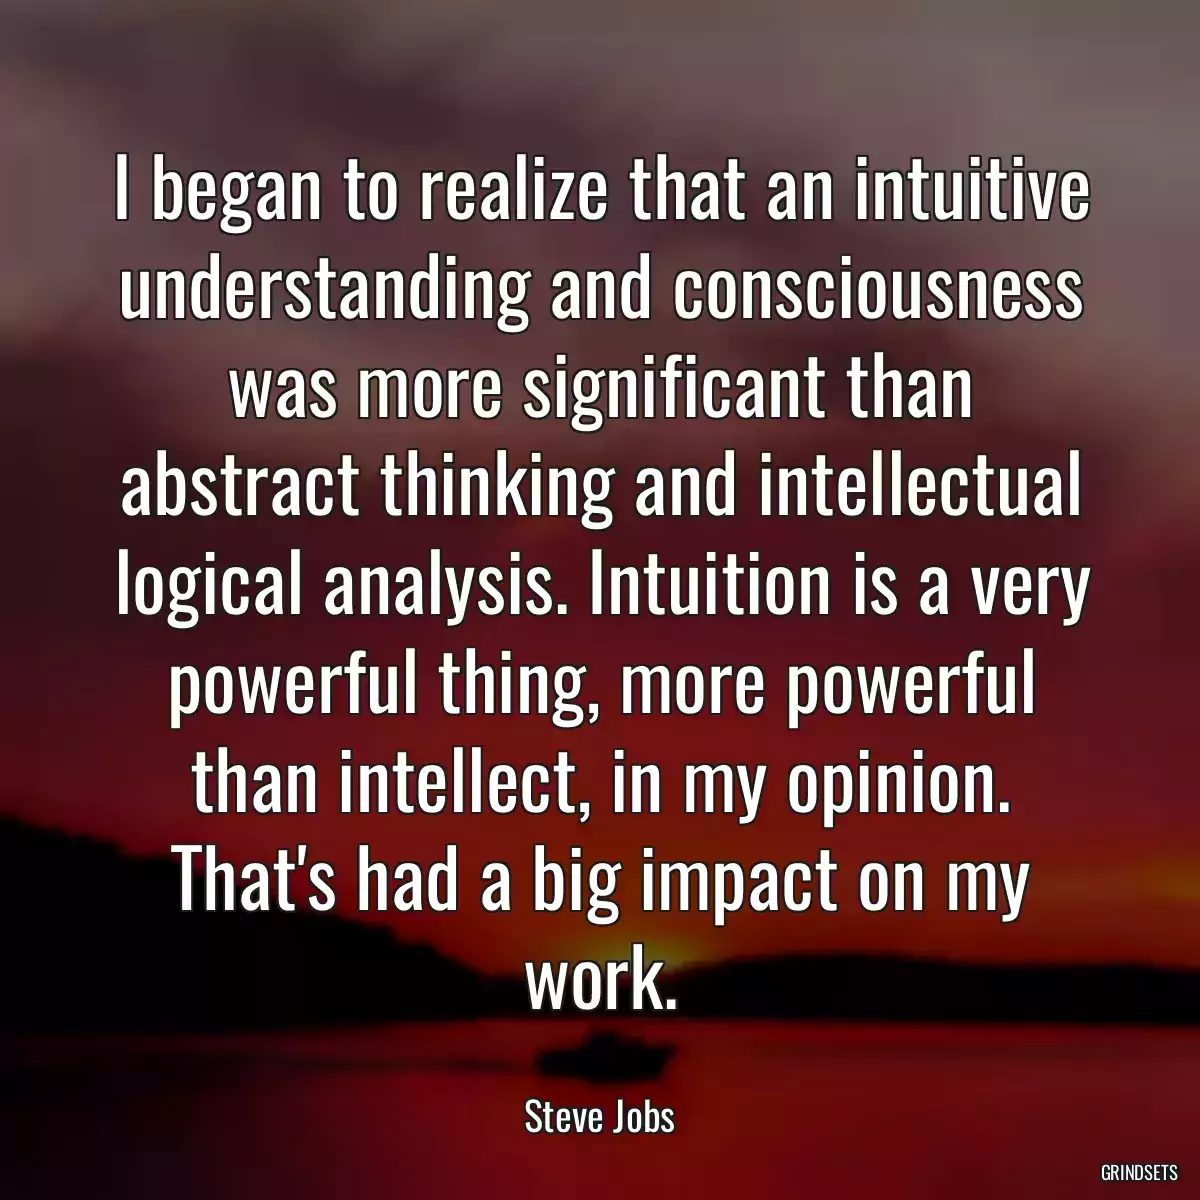 I began to realize that an intuitive understanding and consciousness was more significant than abstract thinking and intellectual logical analysis. Intuition is a very powerful thing, more powerful than intellect, in my opinion. That\'s had a big impact on my work.